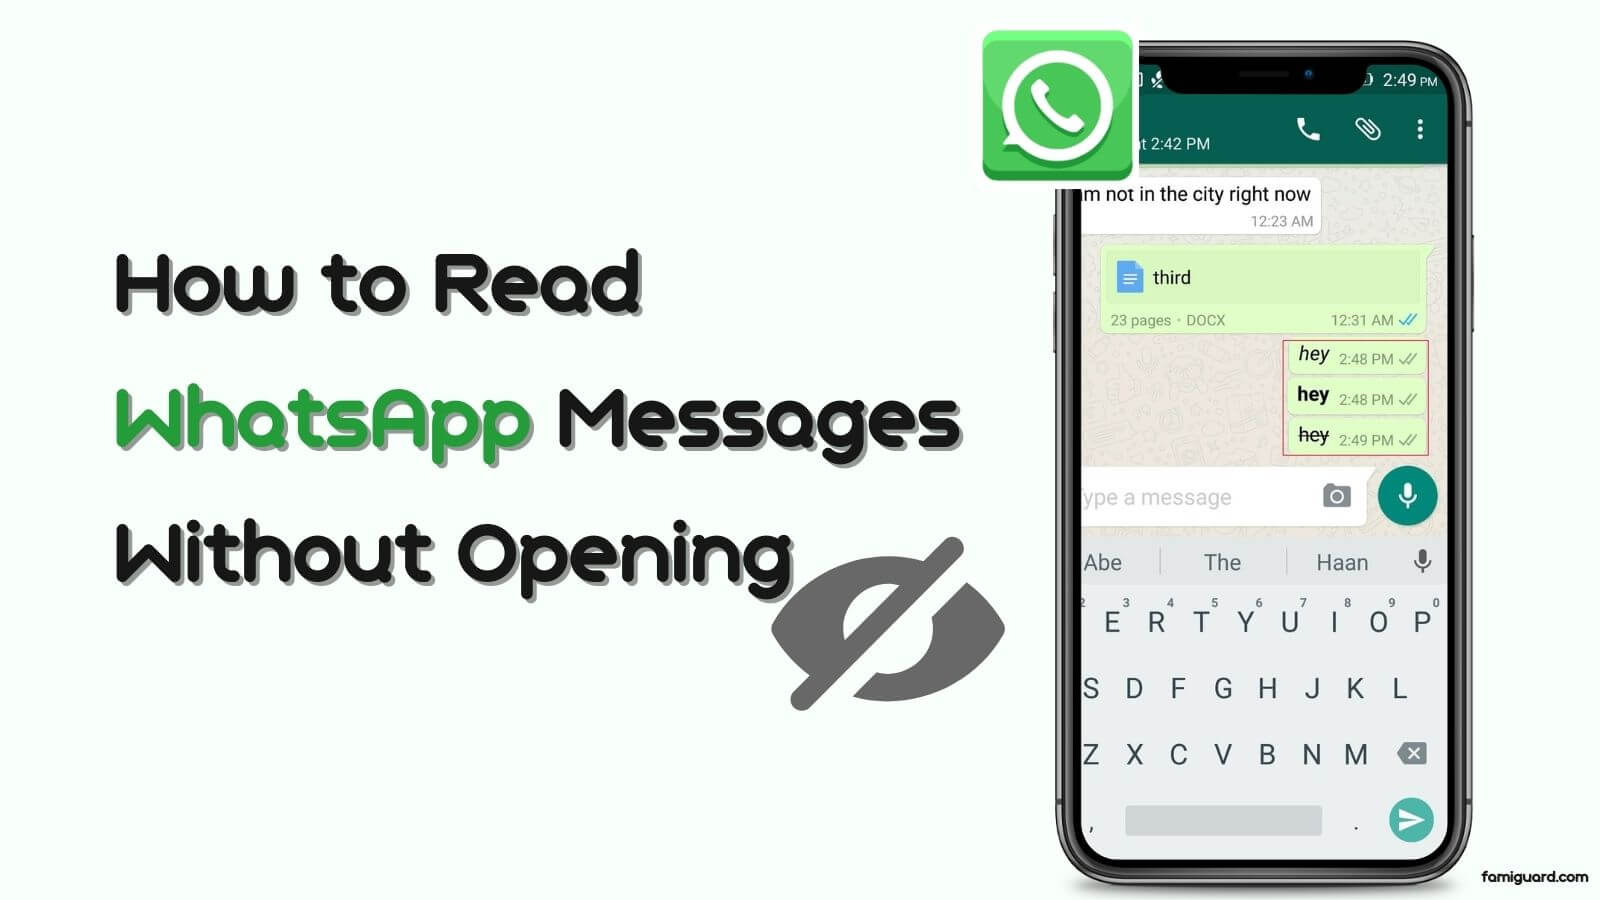 How to Read WhatsApp Messages without Opening